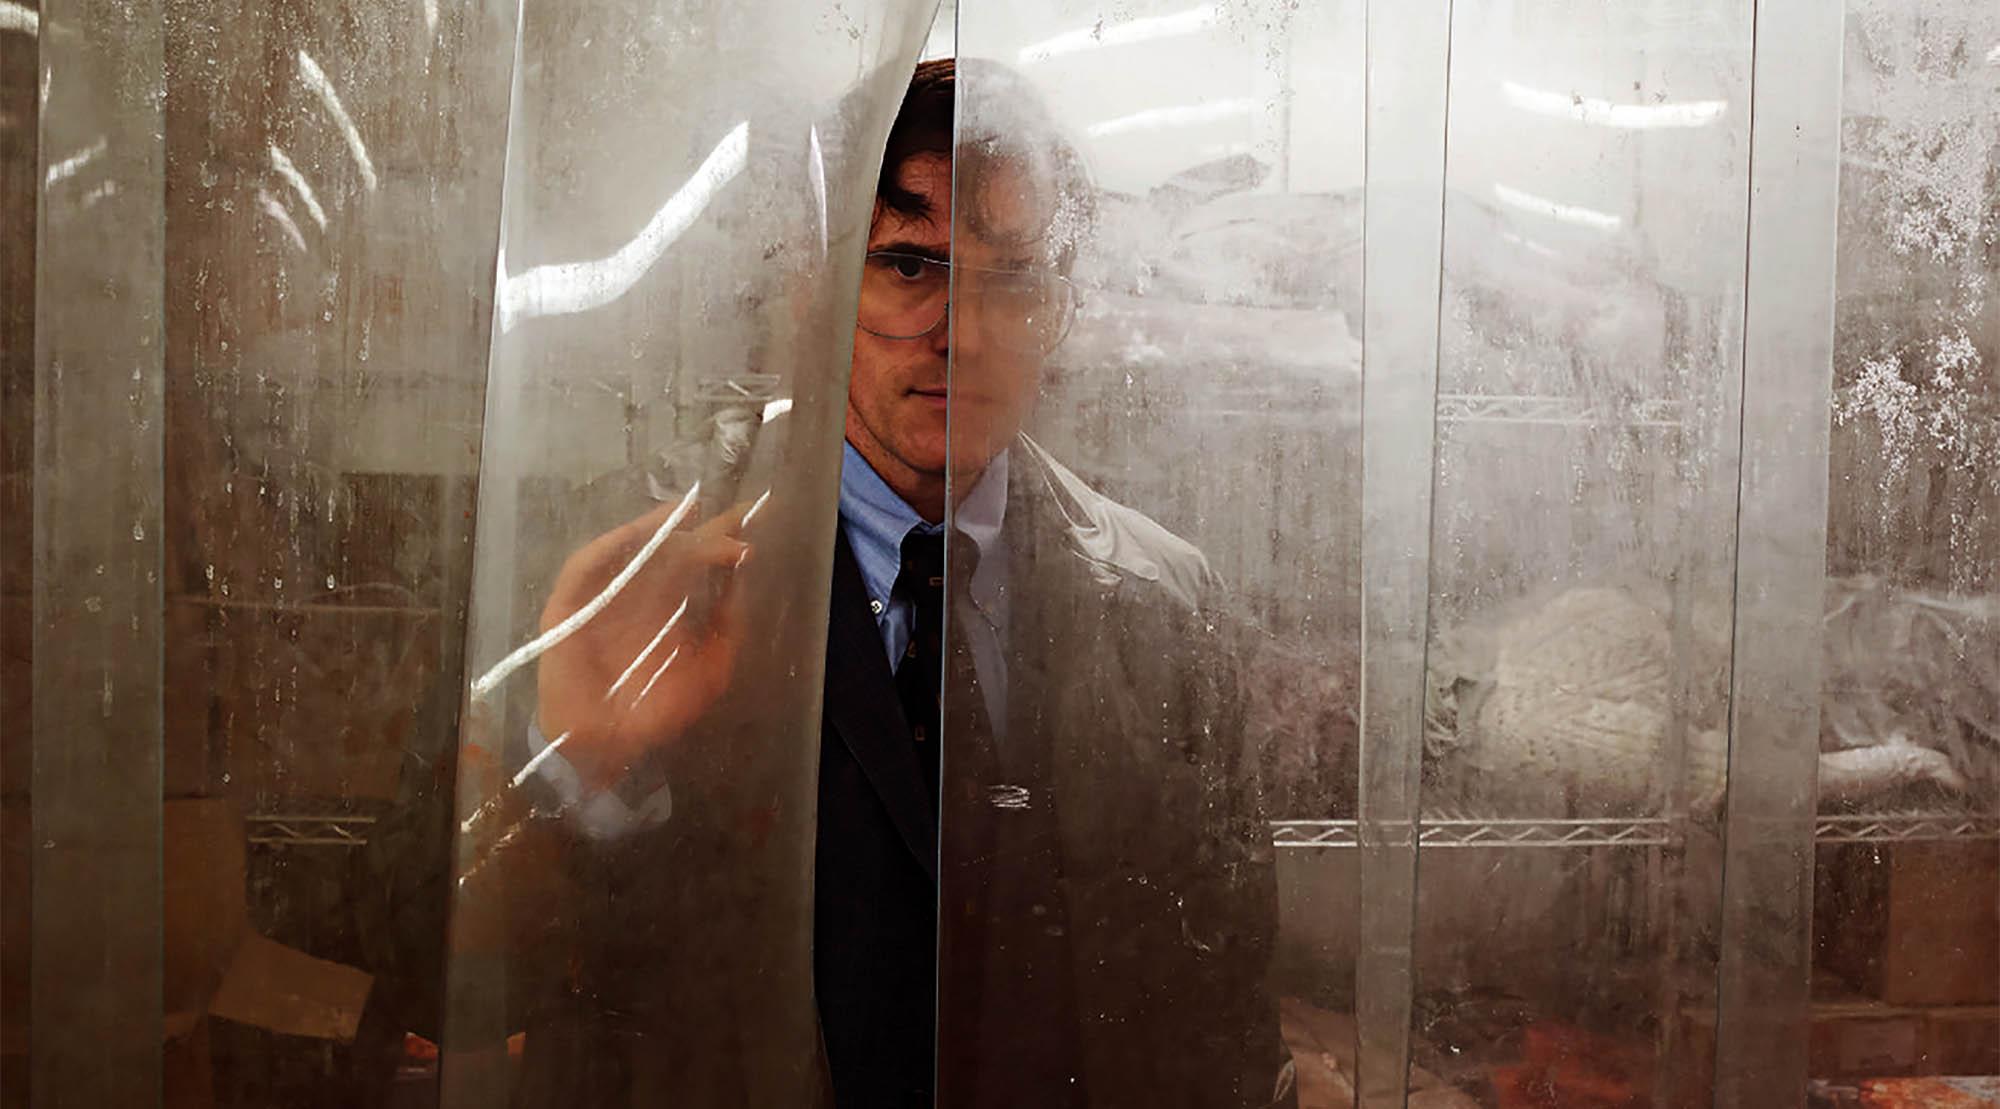 Watch: The first trailer for 'The House that Jack Built'